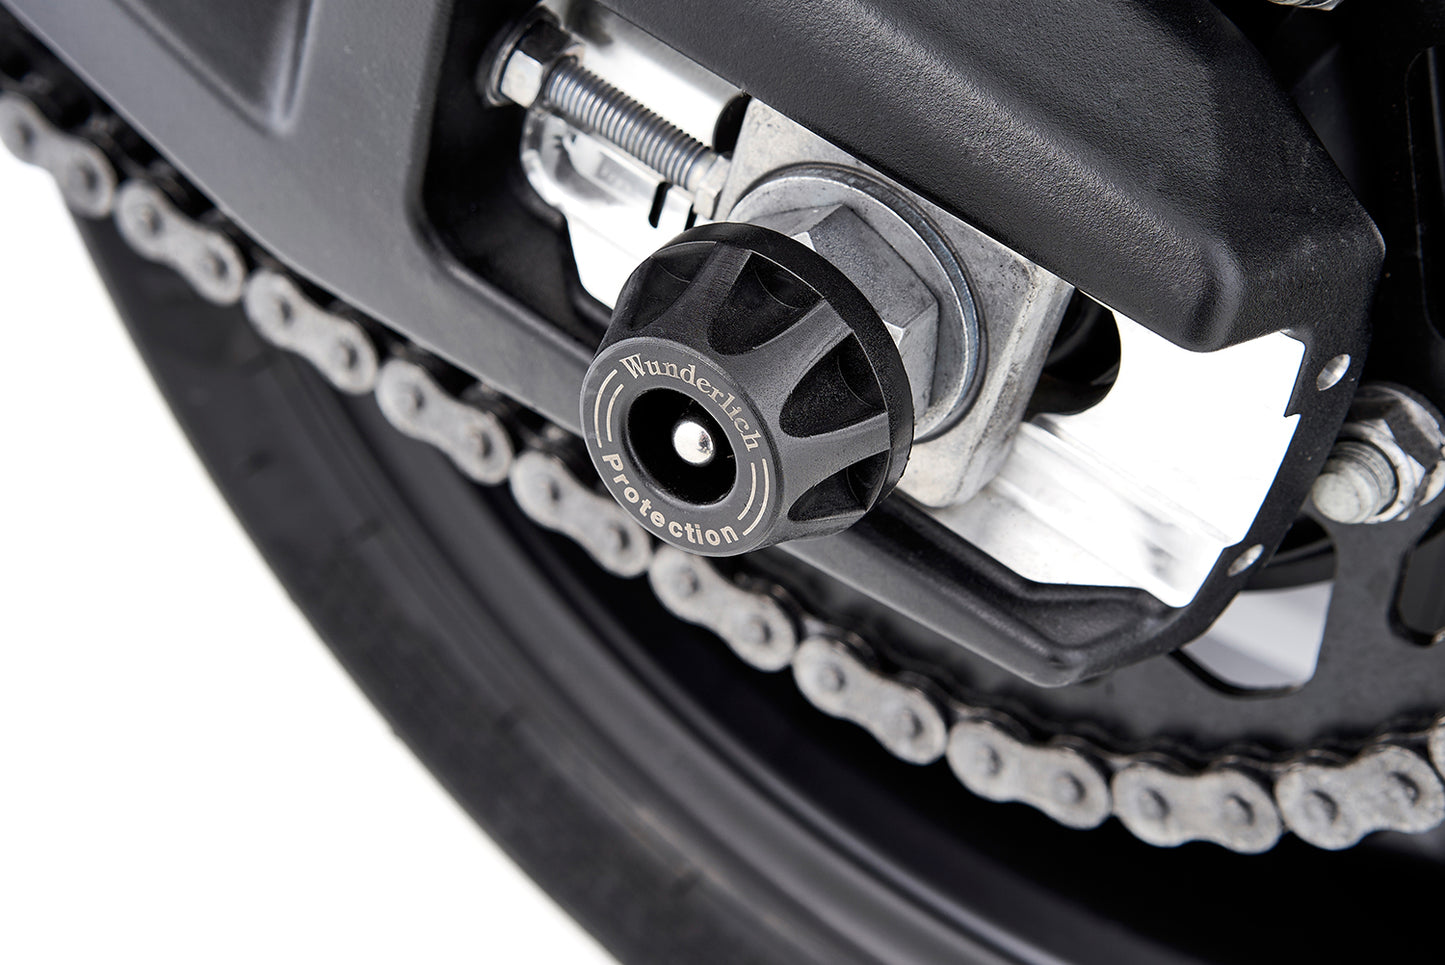 Wunderlich “DOUBLESHOCK” axle protection pads - rear - black